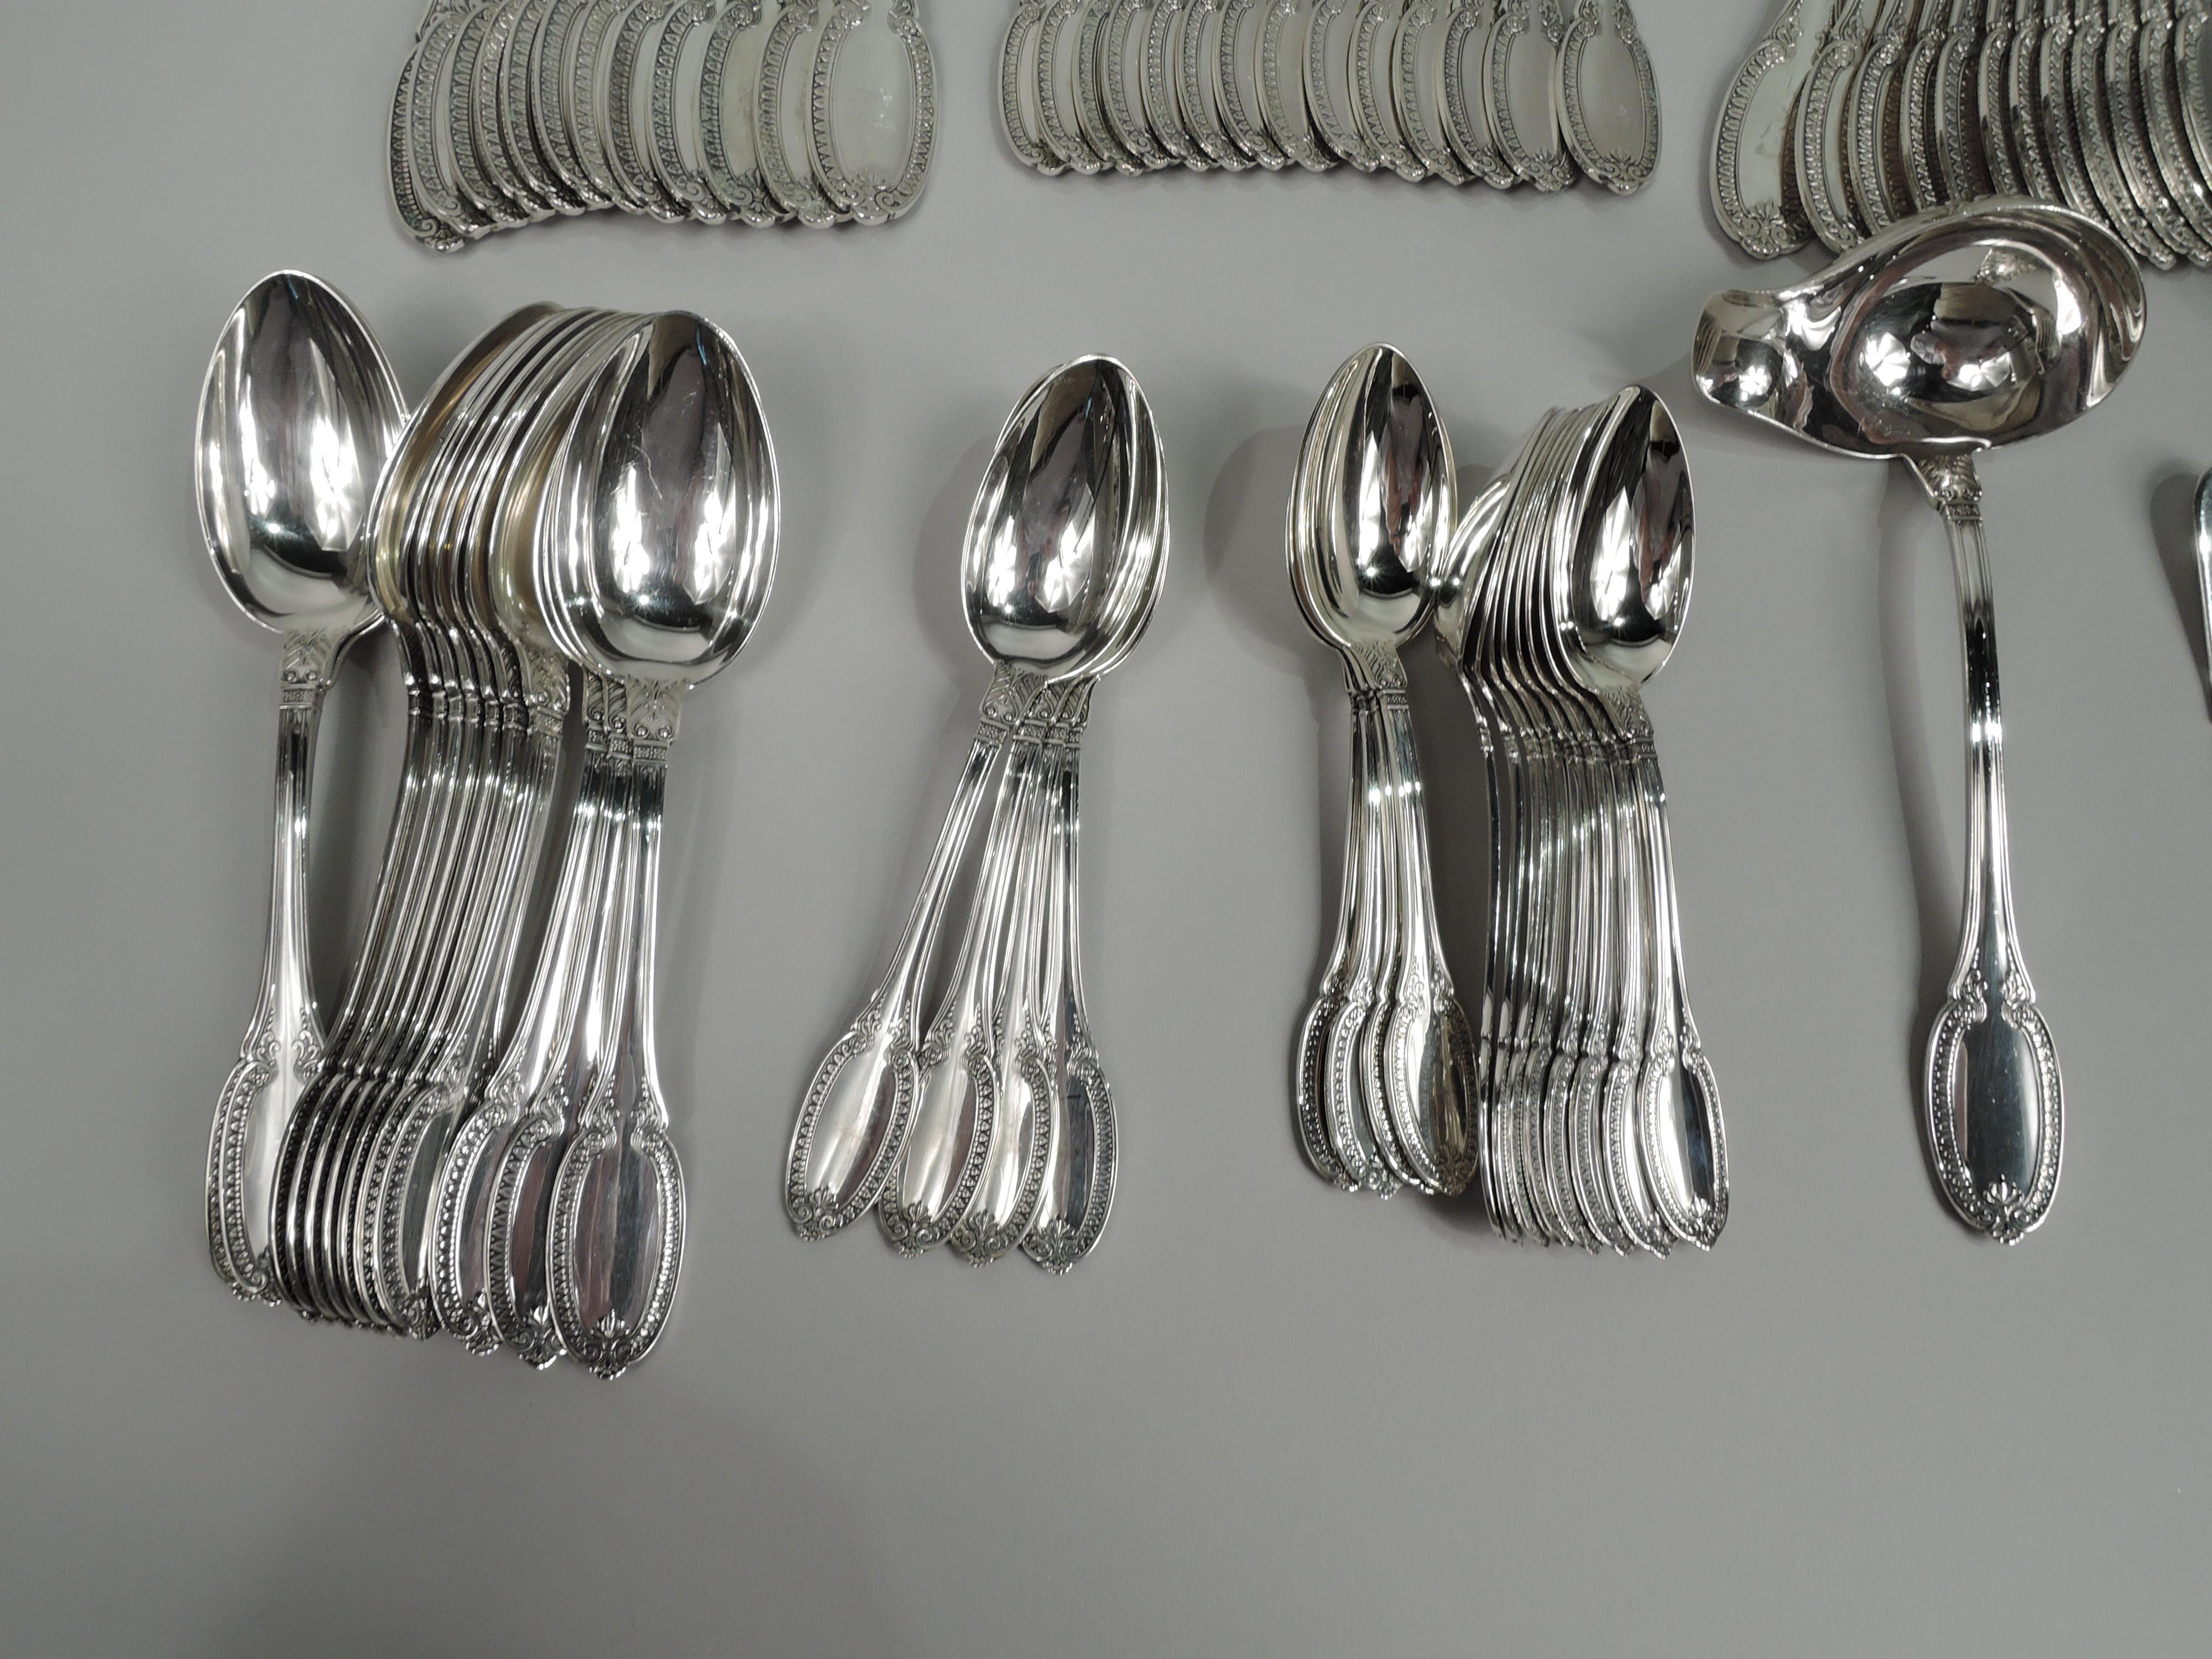 Italian Buccellati Empire Sterling Silver Dinner Set for 12 with 82 Pieces